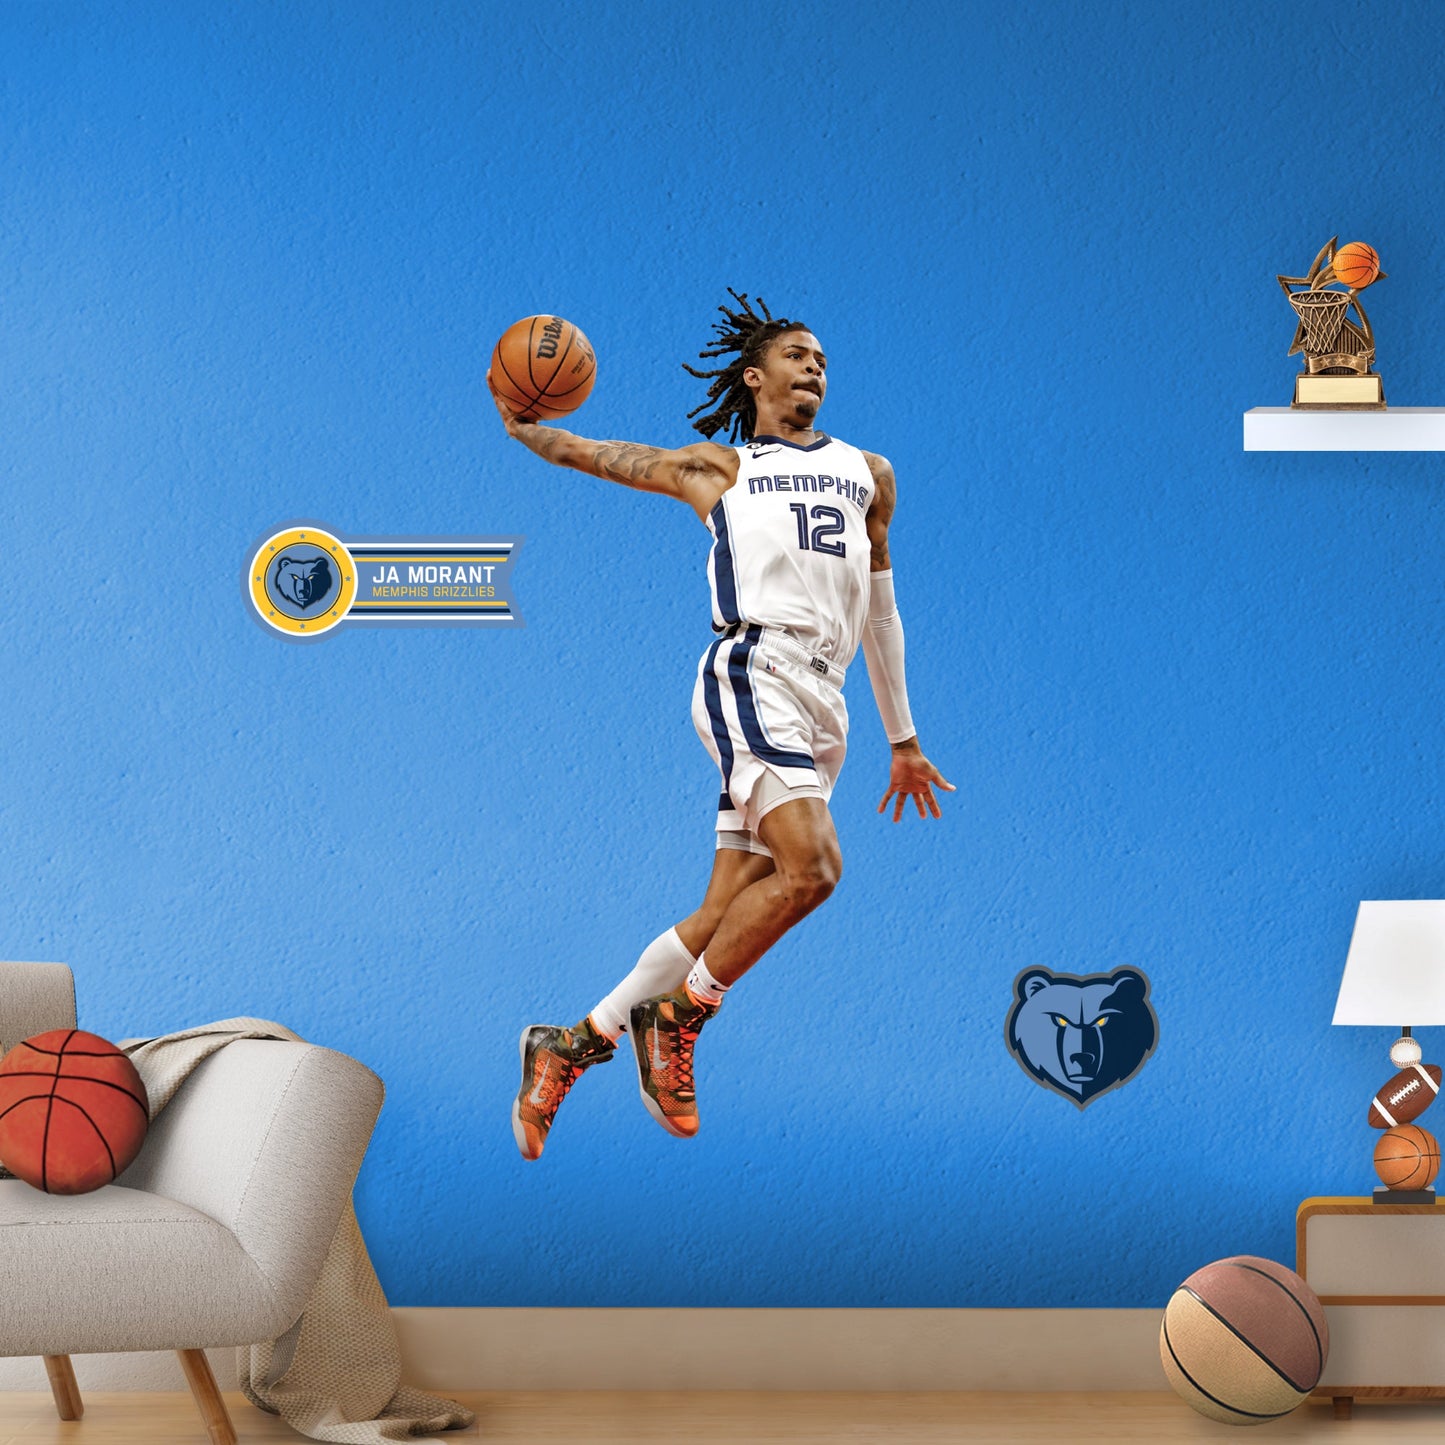 Memphis Grizzlies: Ja Morant Dunk - Officially Licensed NBA Removable Adhesive Decal